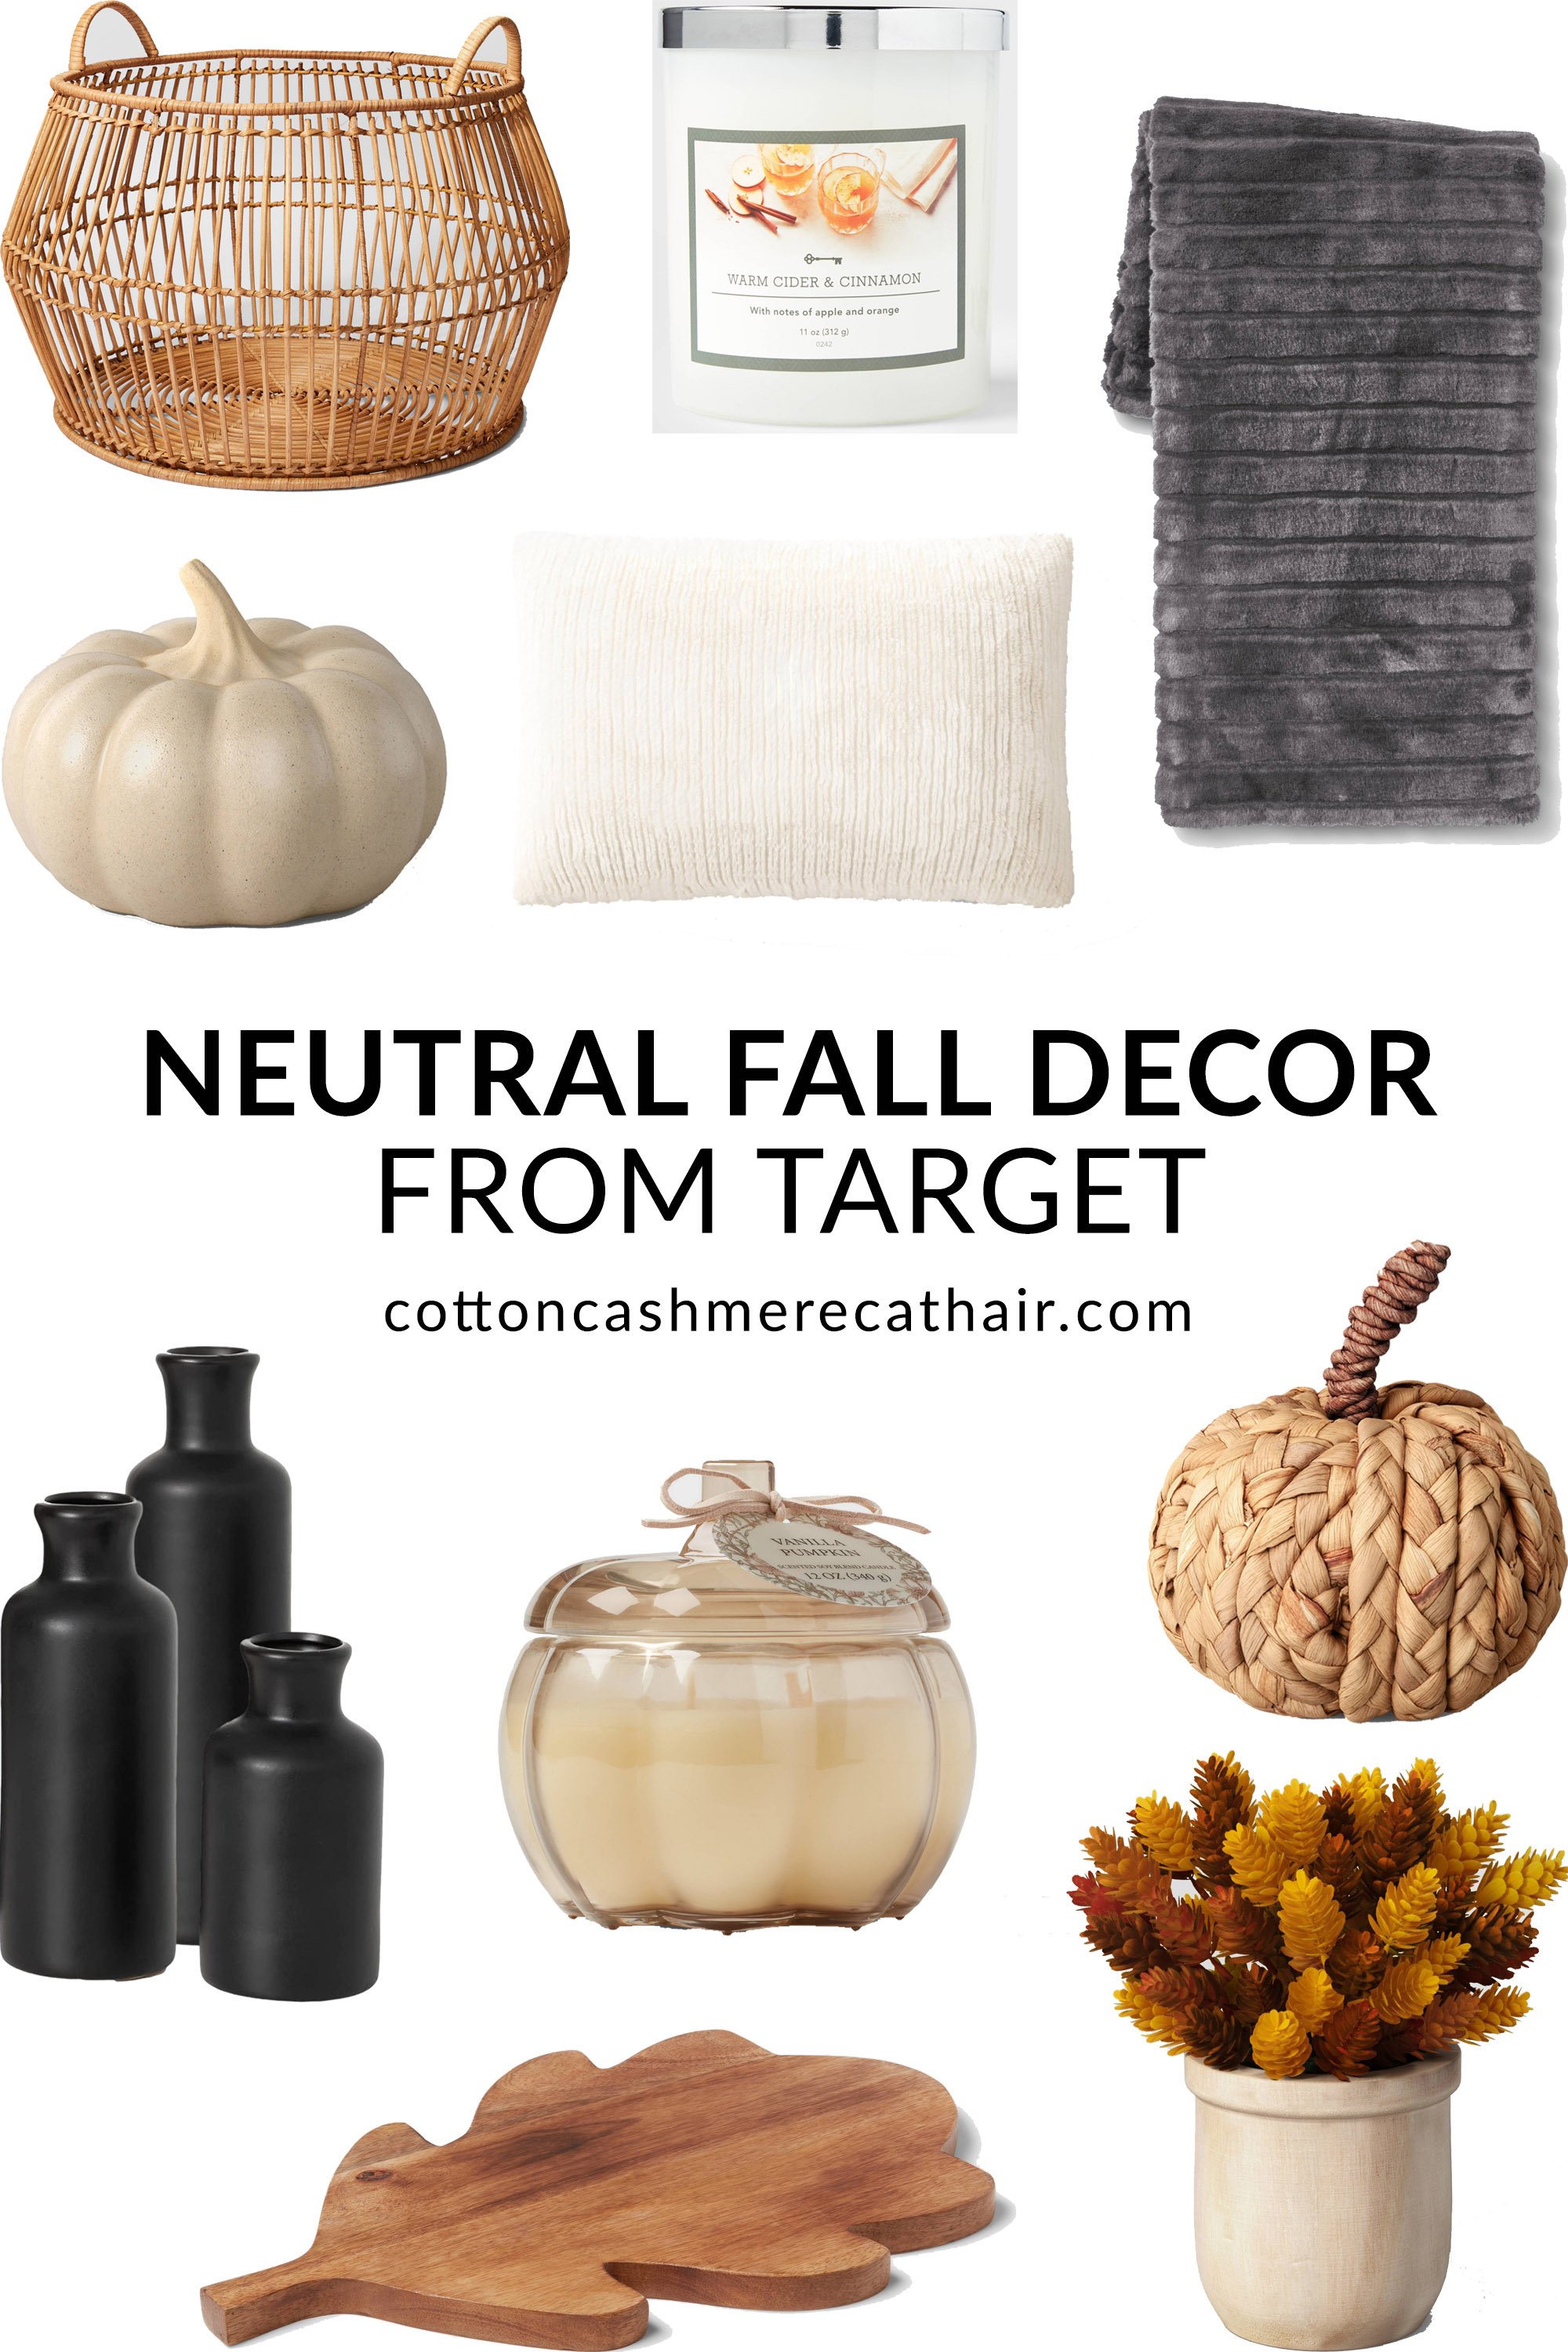 Festive and Neutral Fall Decor for Your Home